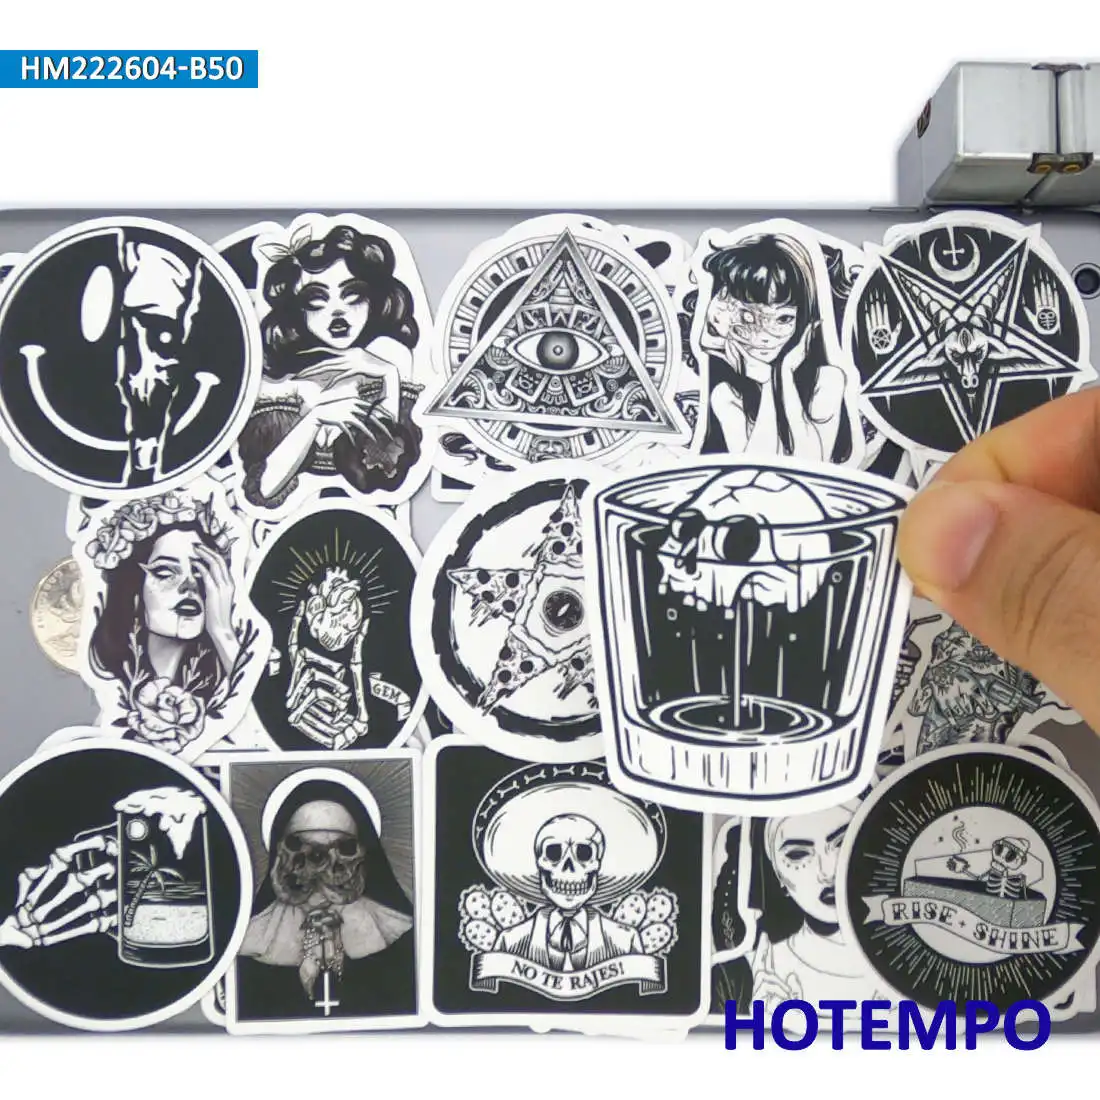 50 Pieces Punk Gothic Art Totem Witch Skull Demon Cthulhu Stickers for Phone Laptop Skateboard Bike Motorcycle Car Sticker Toys